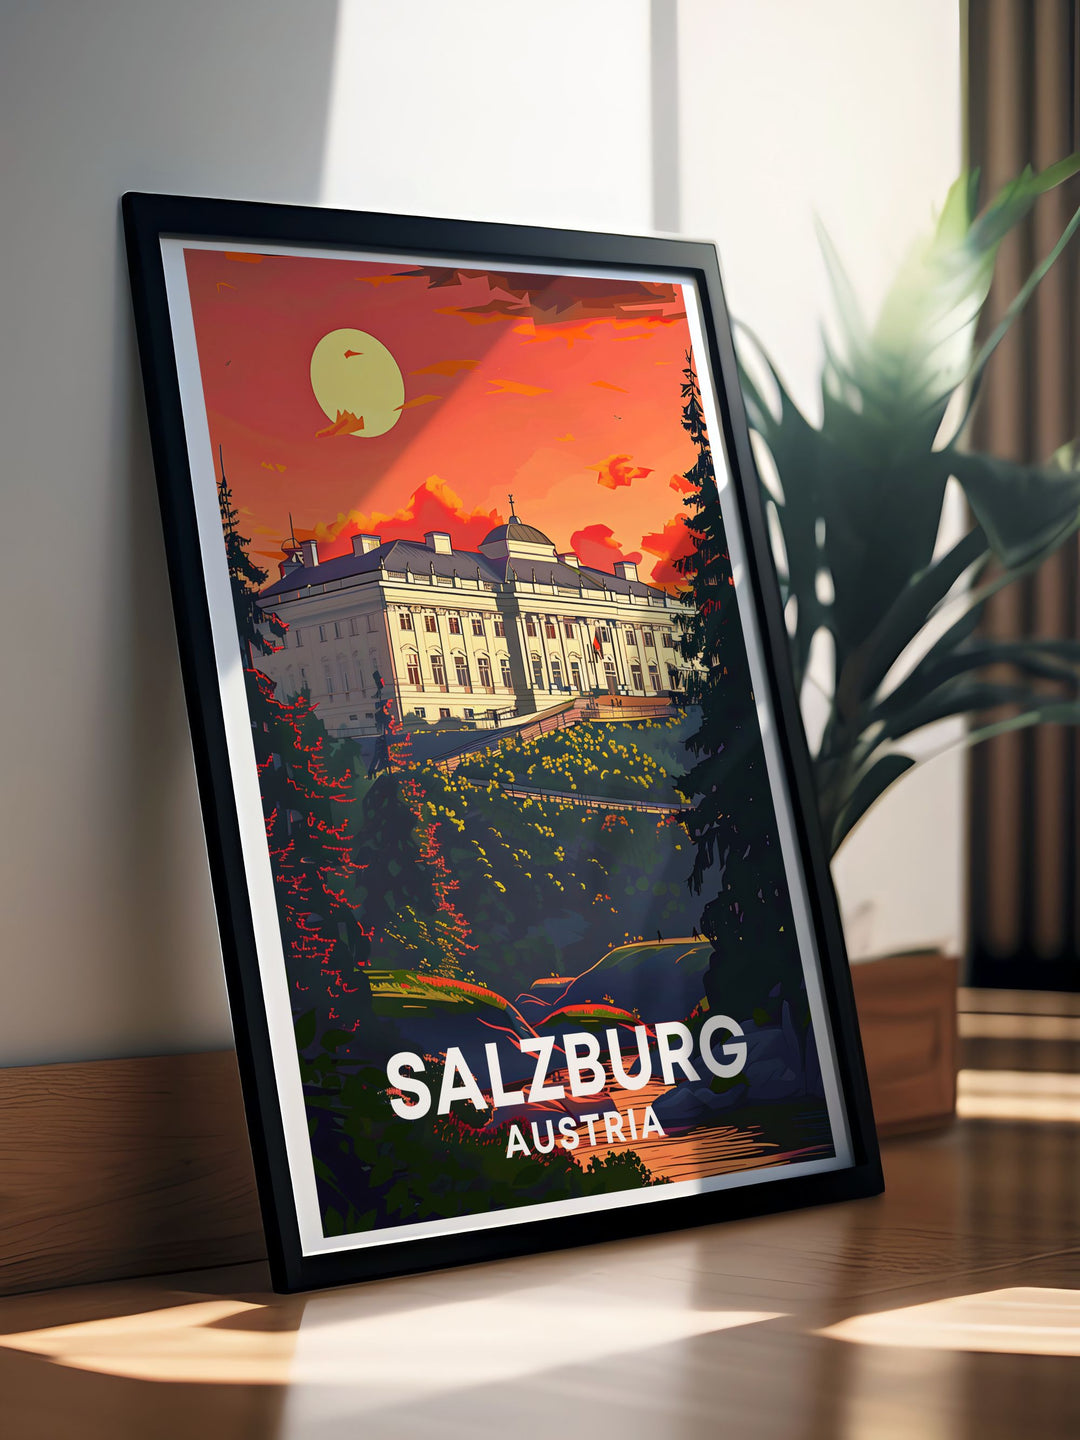 Stunning view of Mirabel Palace in Salzburg. Add this vintage travel print to your home decor. Perfect for history buffs and fans of Austrian landmarks. The vibrant colors and intricate details highlight the beauty of Mirabel Palace and the charm of Salzburg.